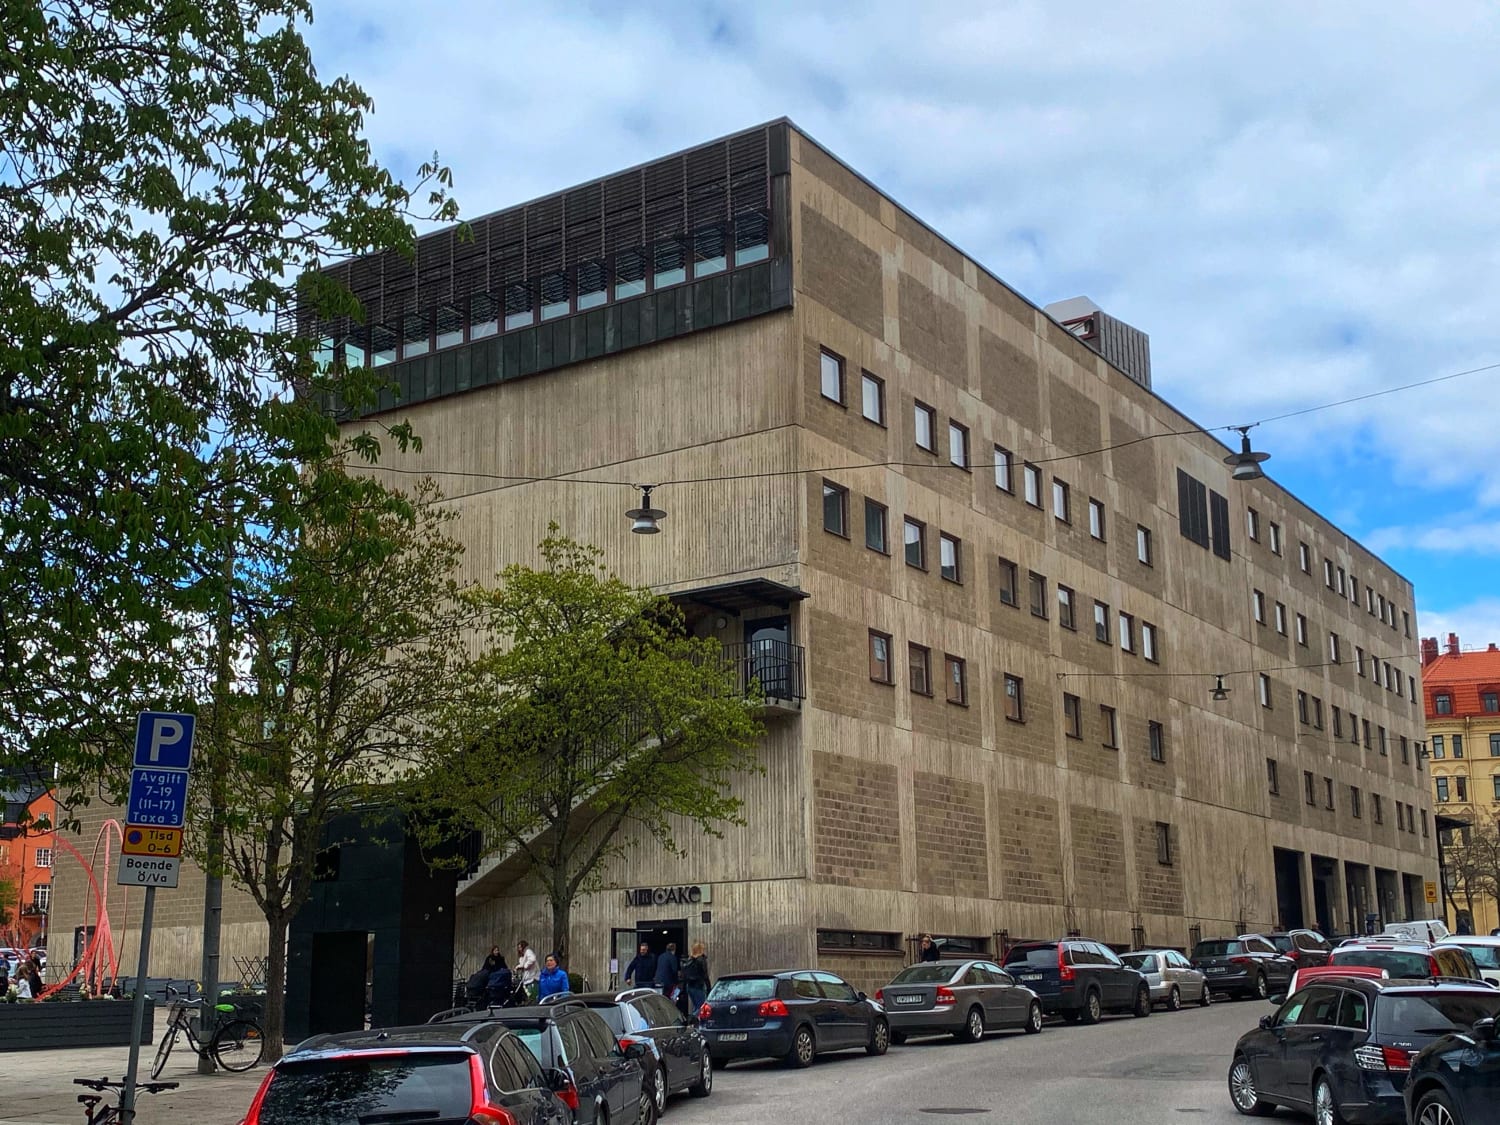 The old School of Architecture, this 12,000-square-foot neo-brutalist concrete building has been named the ugliest building in Stockholm (Sweden) on many occasions. Architect; Gunnar Henriksson